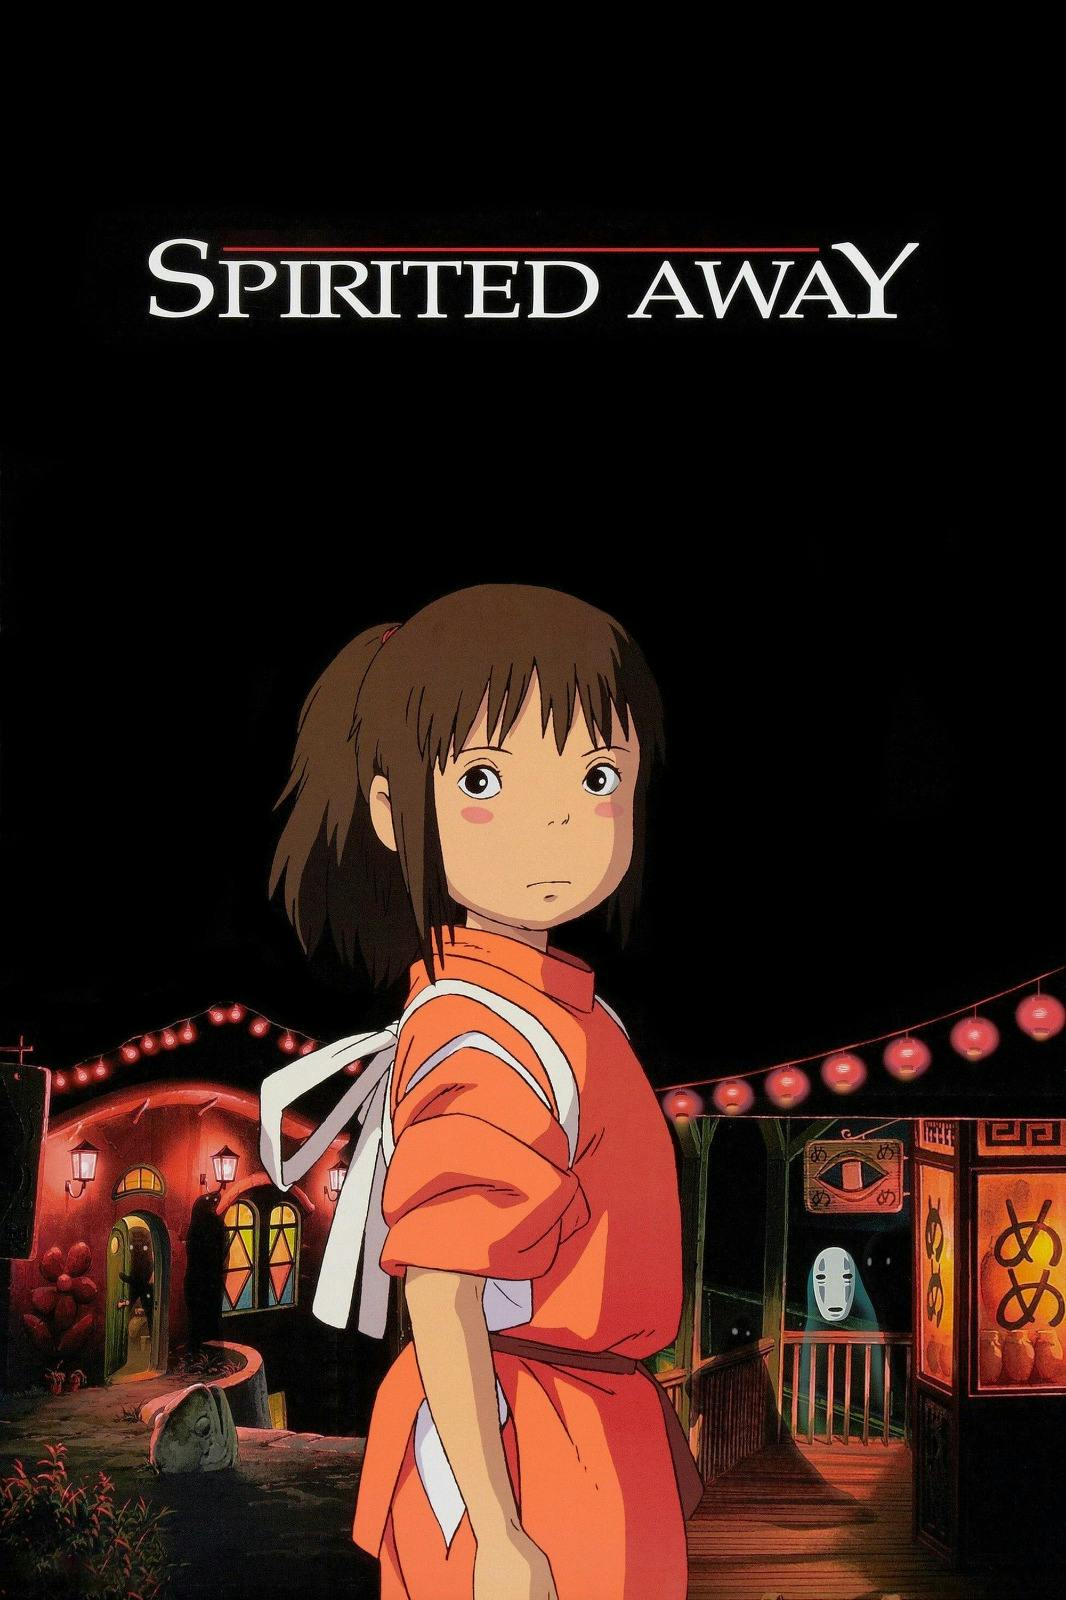 Episode # 333 Spirited Away with Emma Kathryn and Paul Costello from The Yearbook Committee podcast